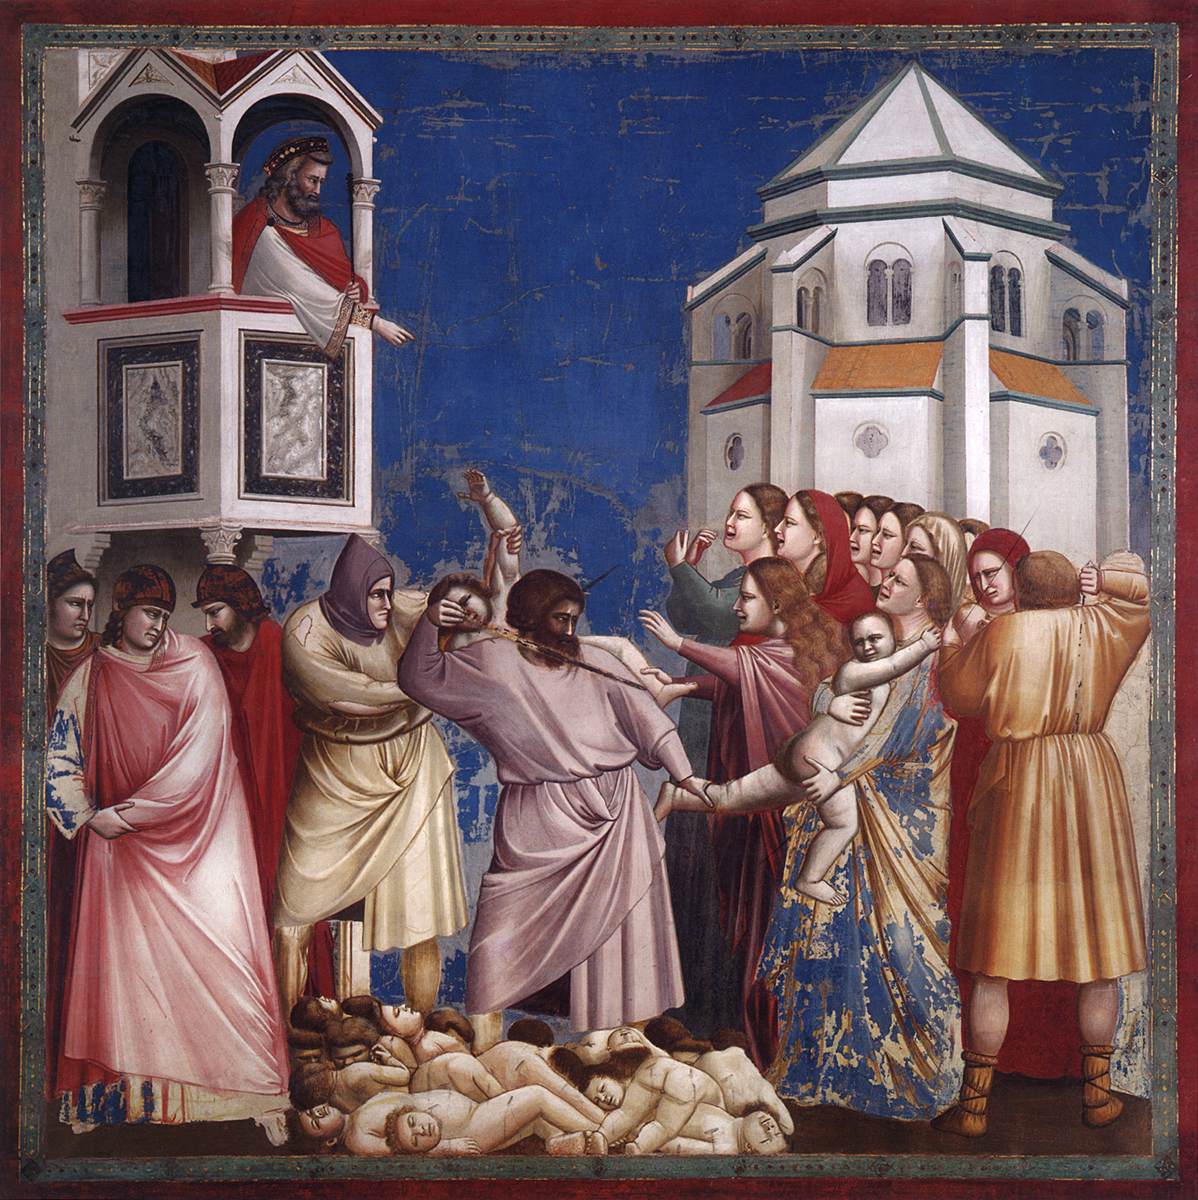 No 21 Scenes from the Life of Christ: 5 The Massacre of the Innocents